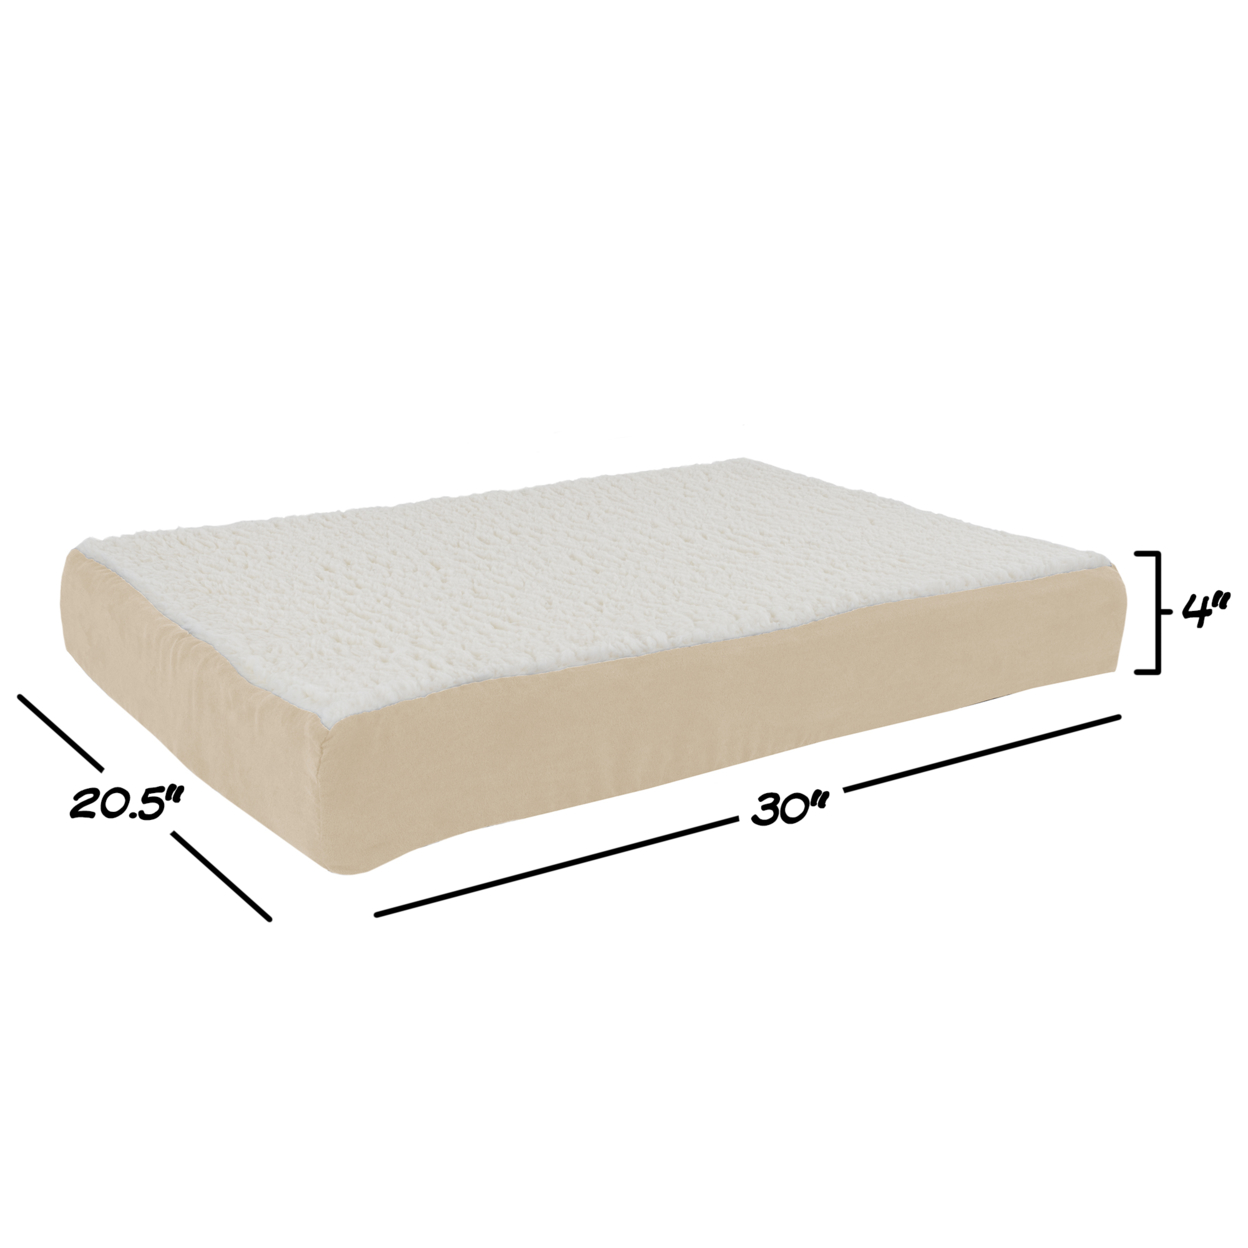 Orthopedic Sherpa Top Pet Bed With Memory Foam And Removable Cover 30 X 20 X 4 Tan Medium